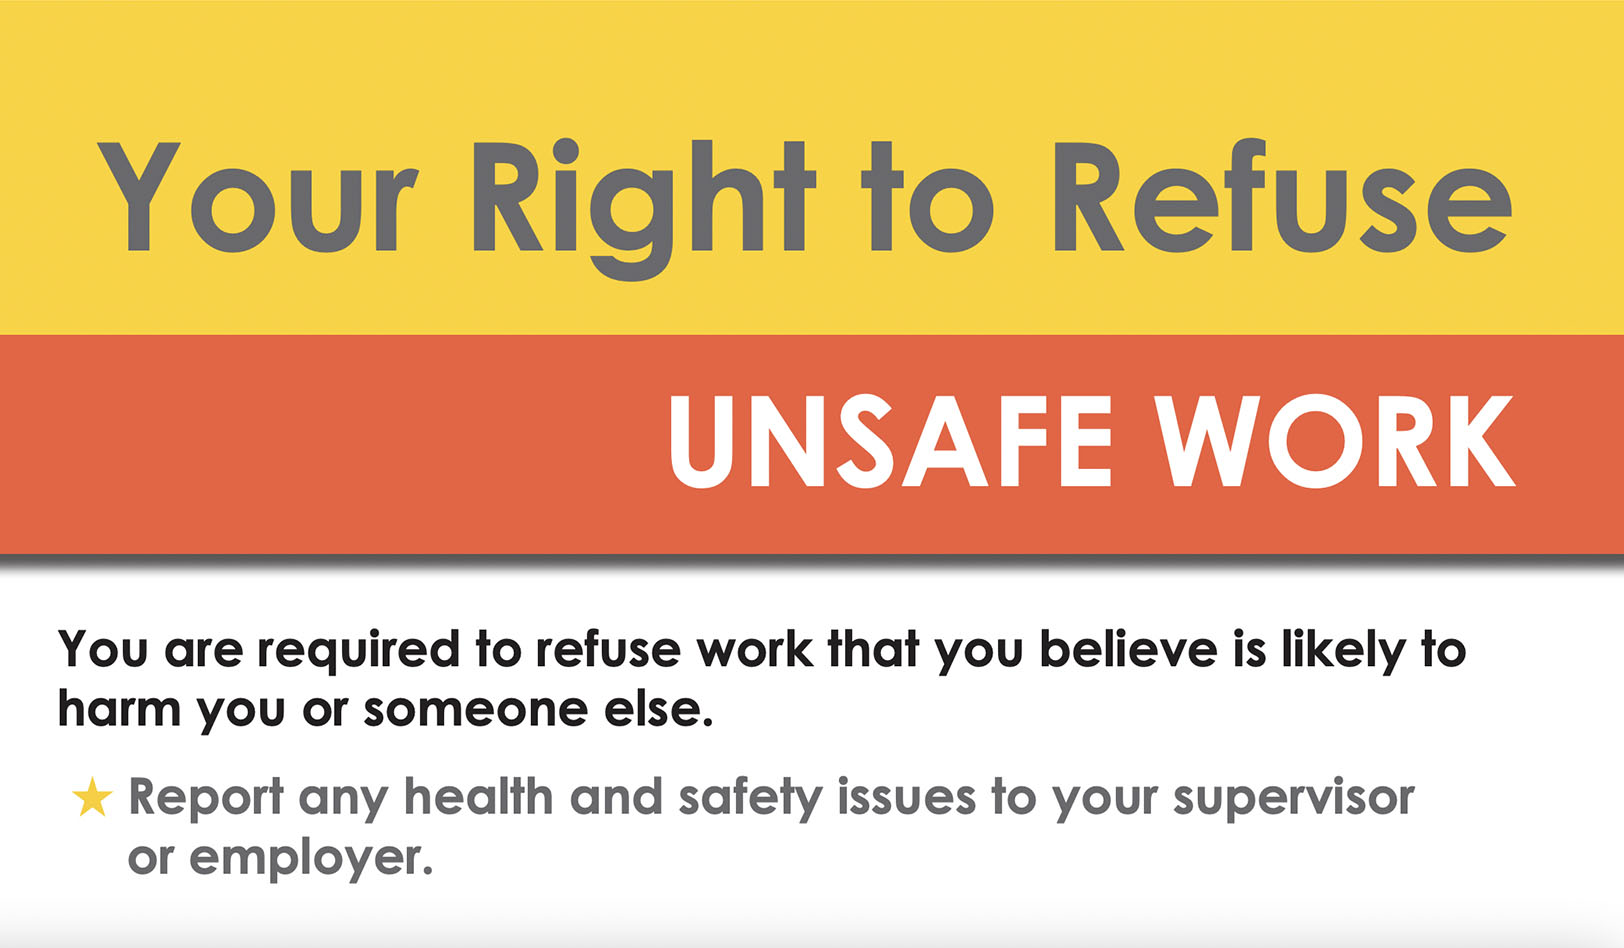 Your Right to Refuse Unsafe Work